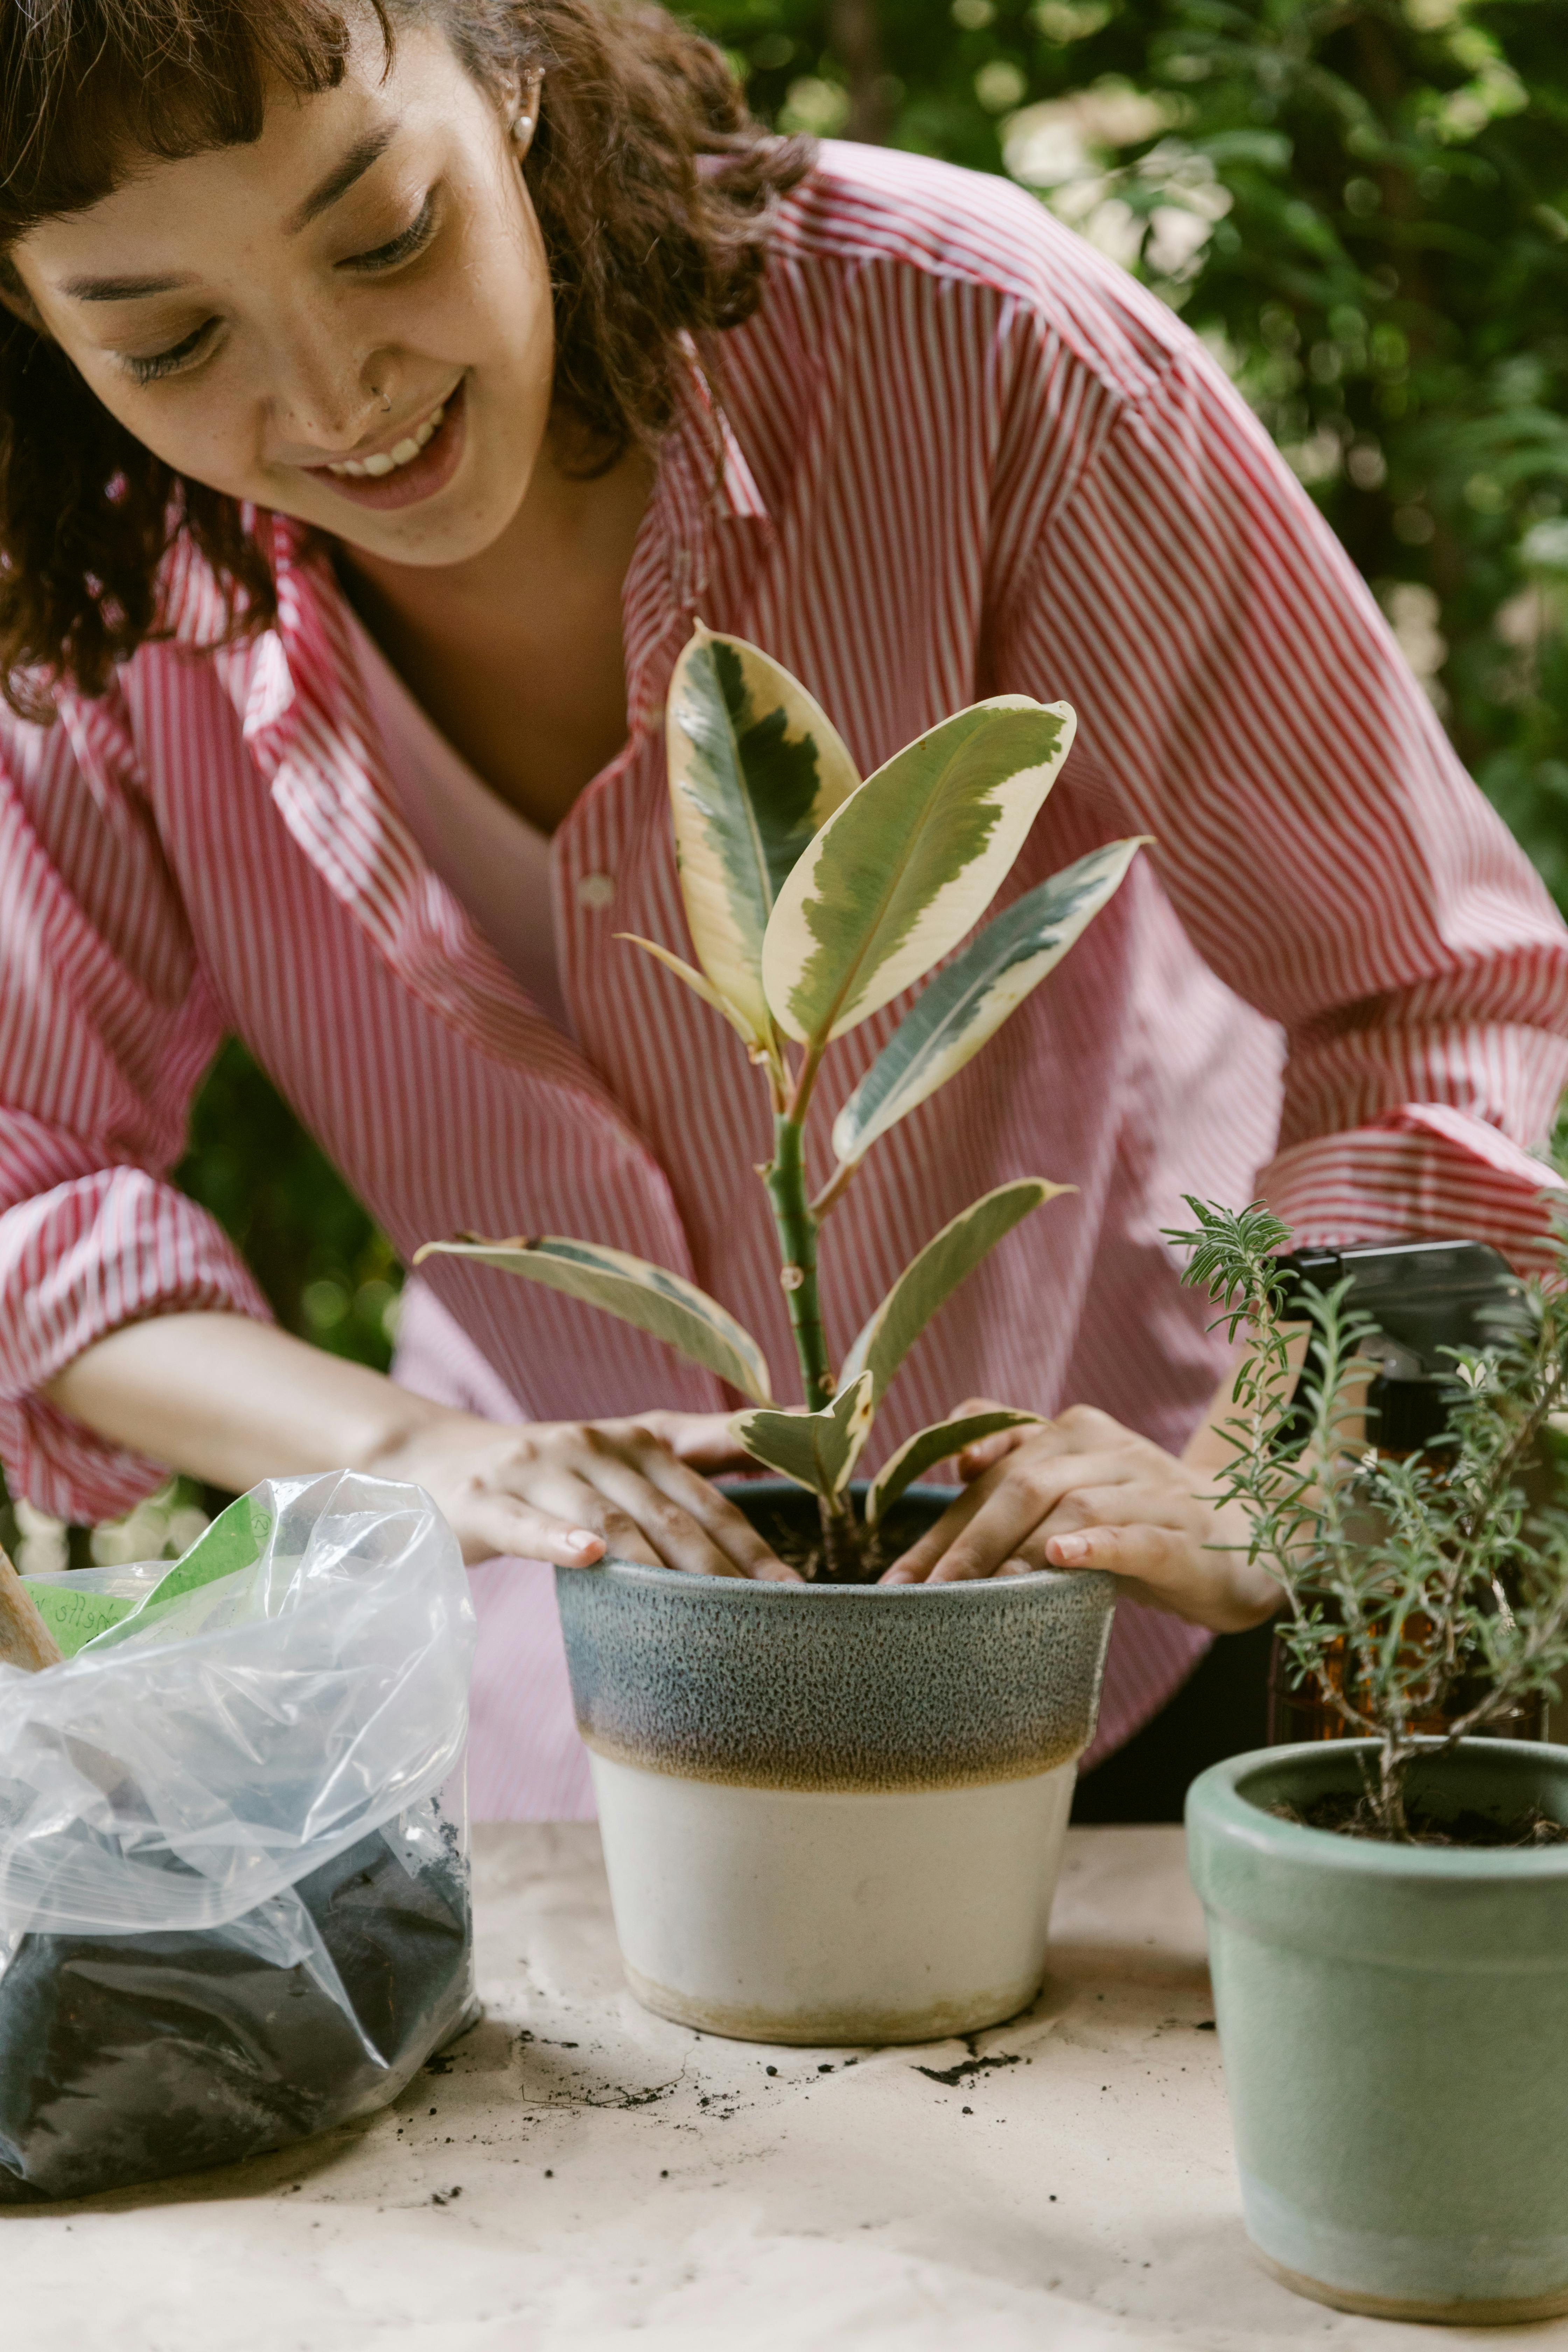 Grow Your Green Thumb with Plant Care Apps